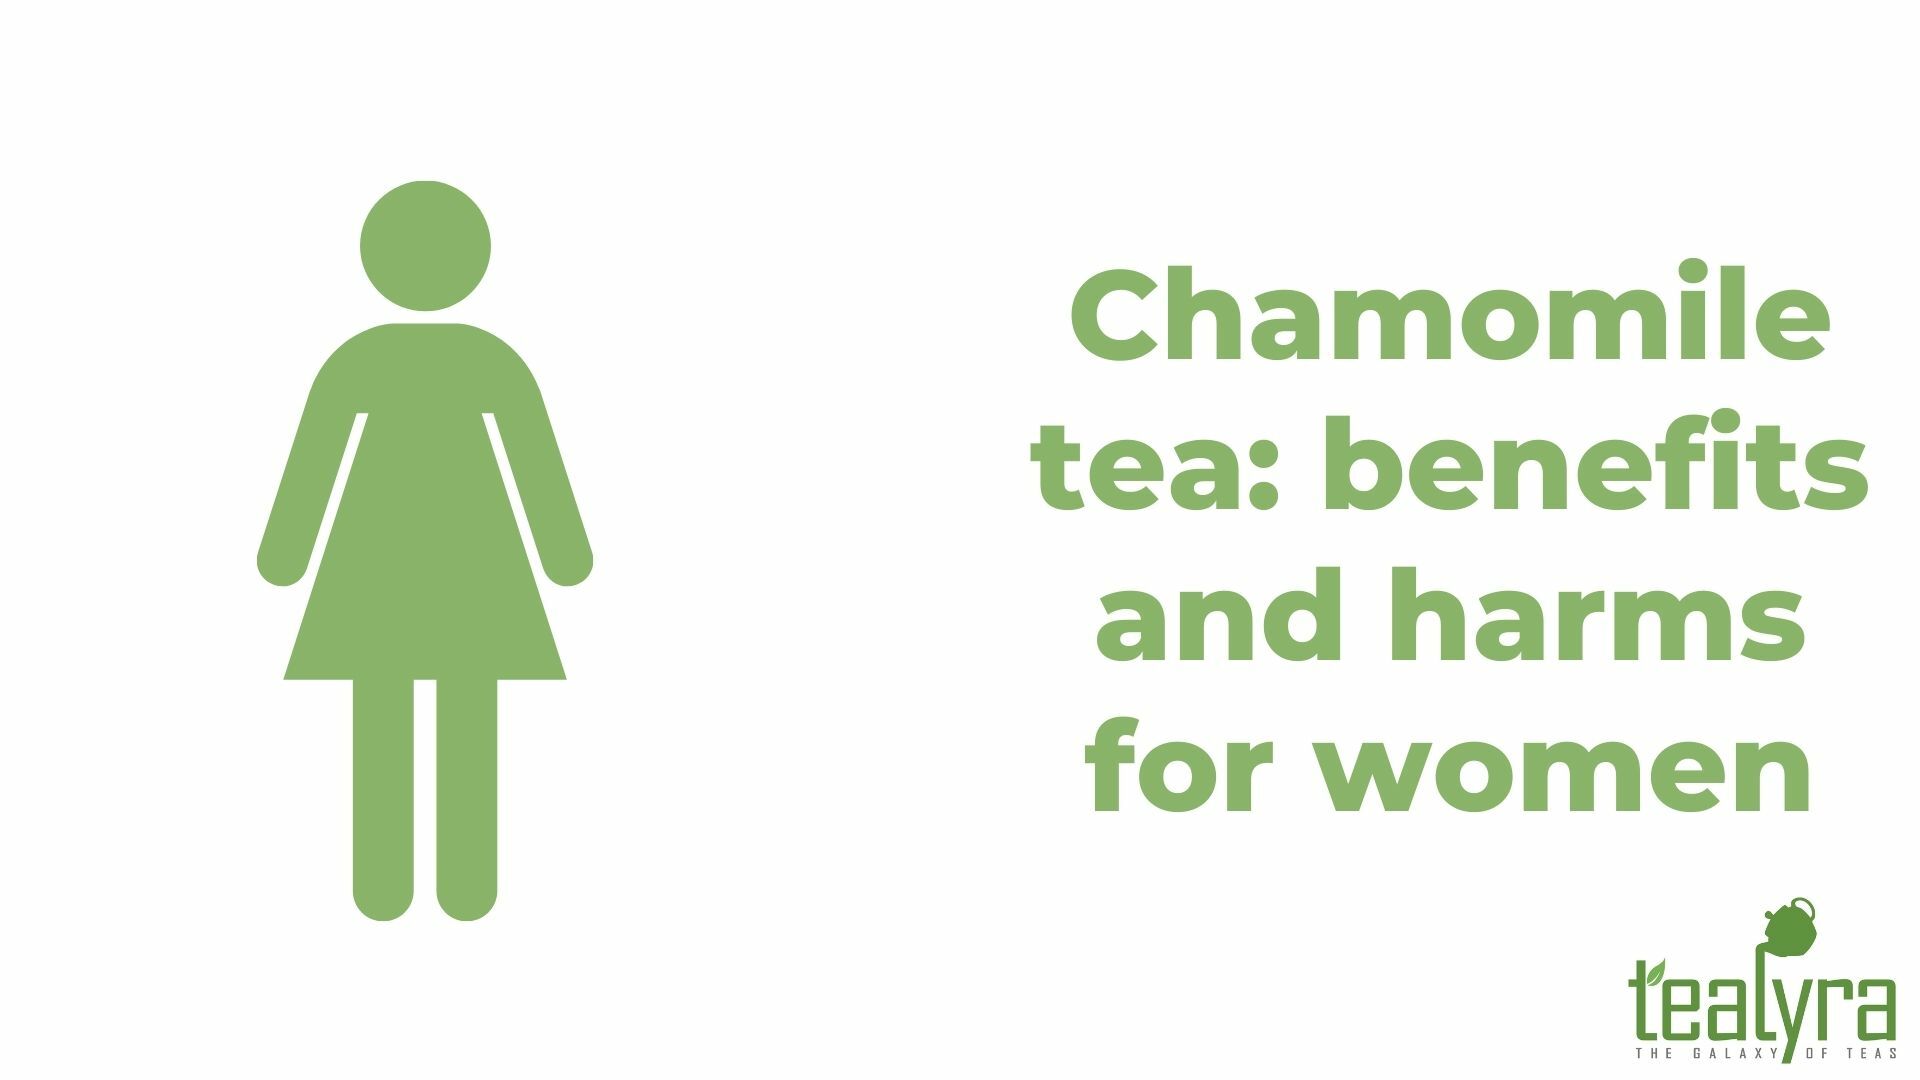 Image-chamomile-tea-benefits-and-harms-for-women